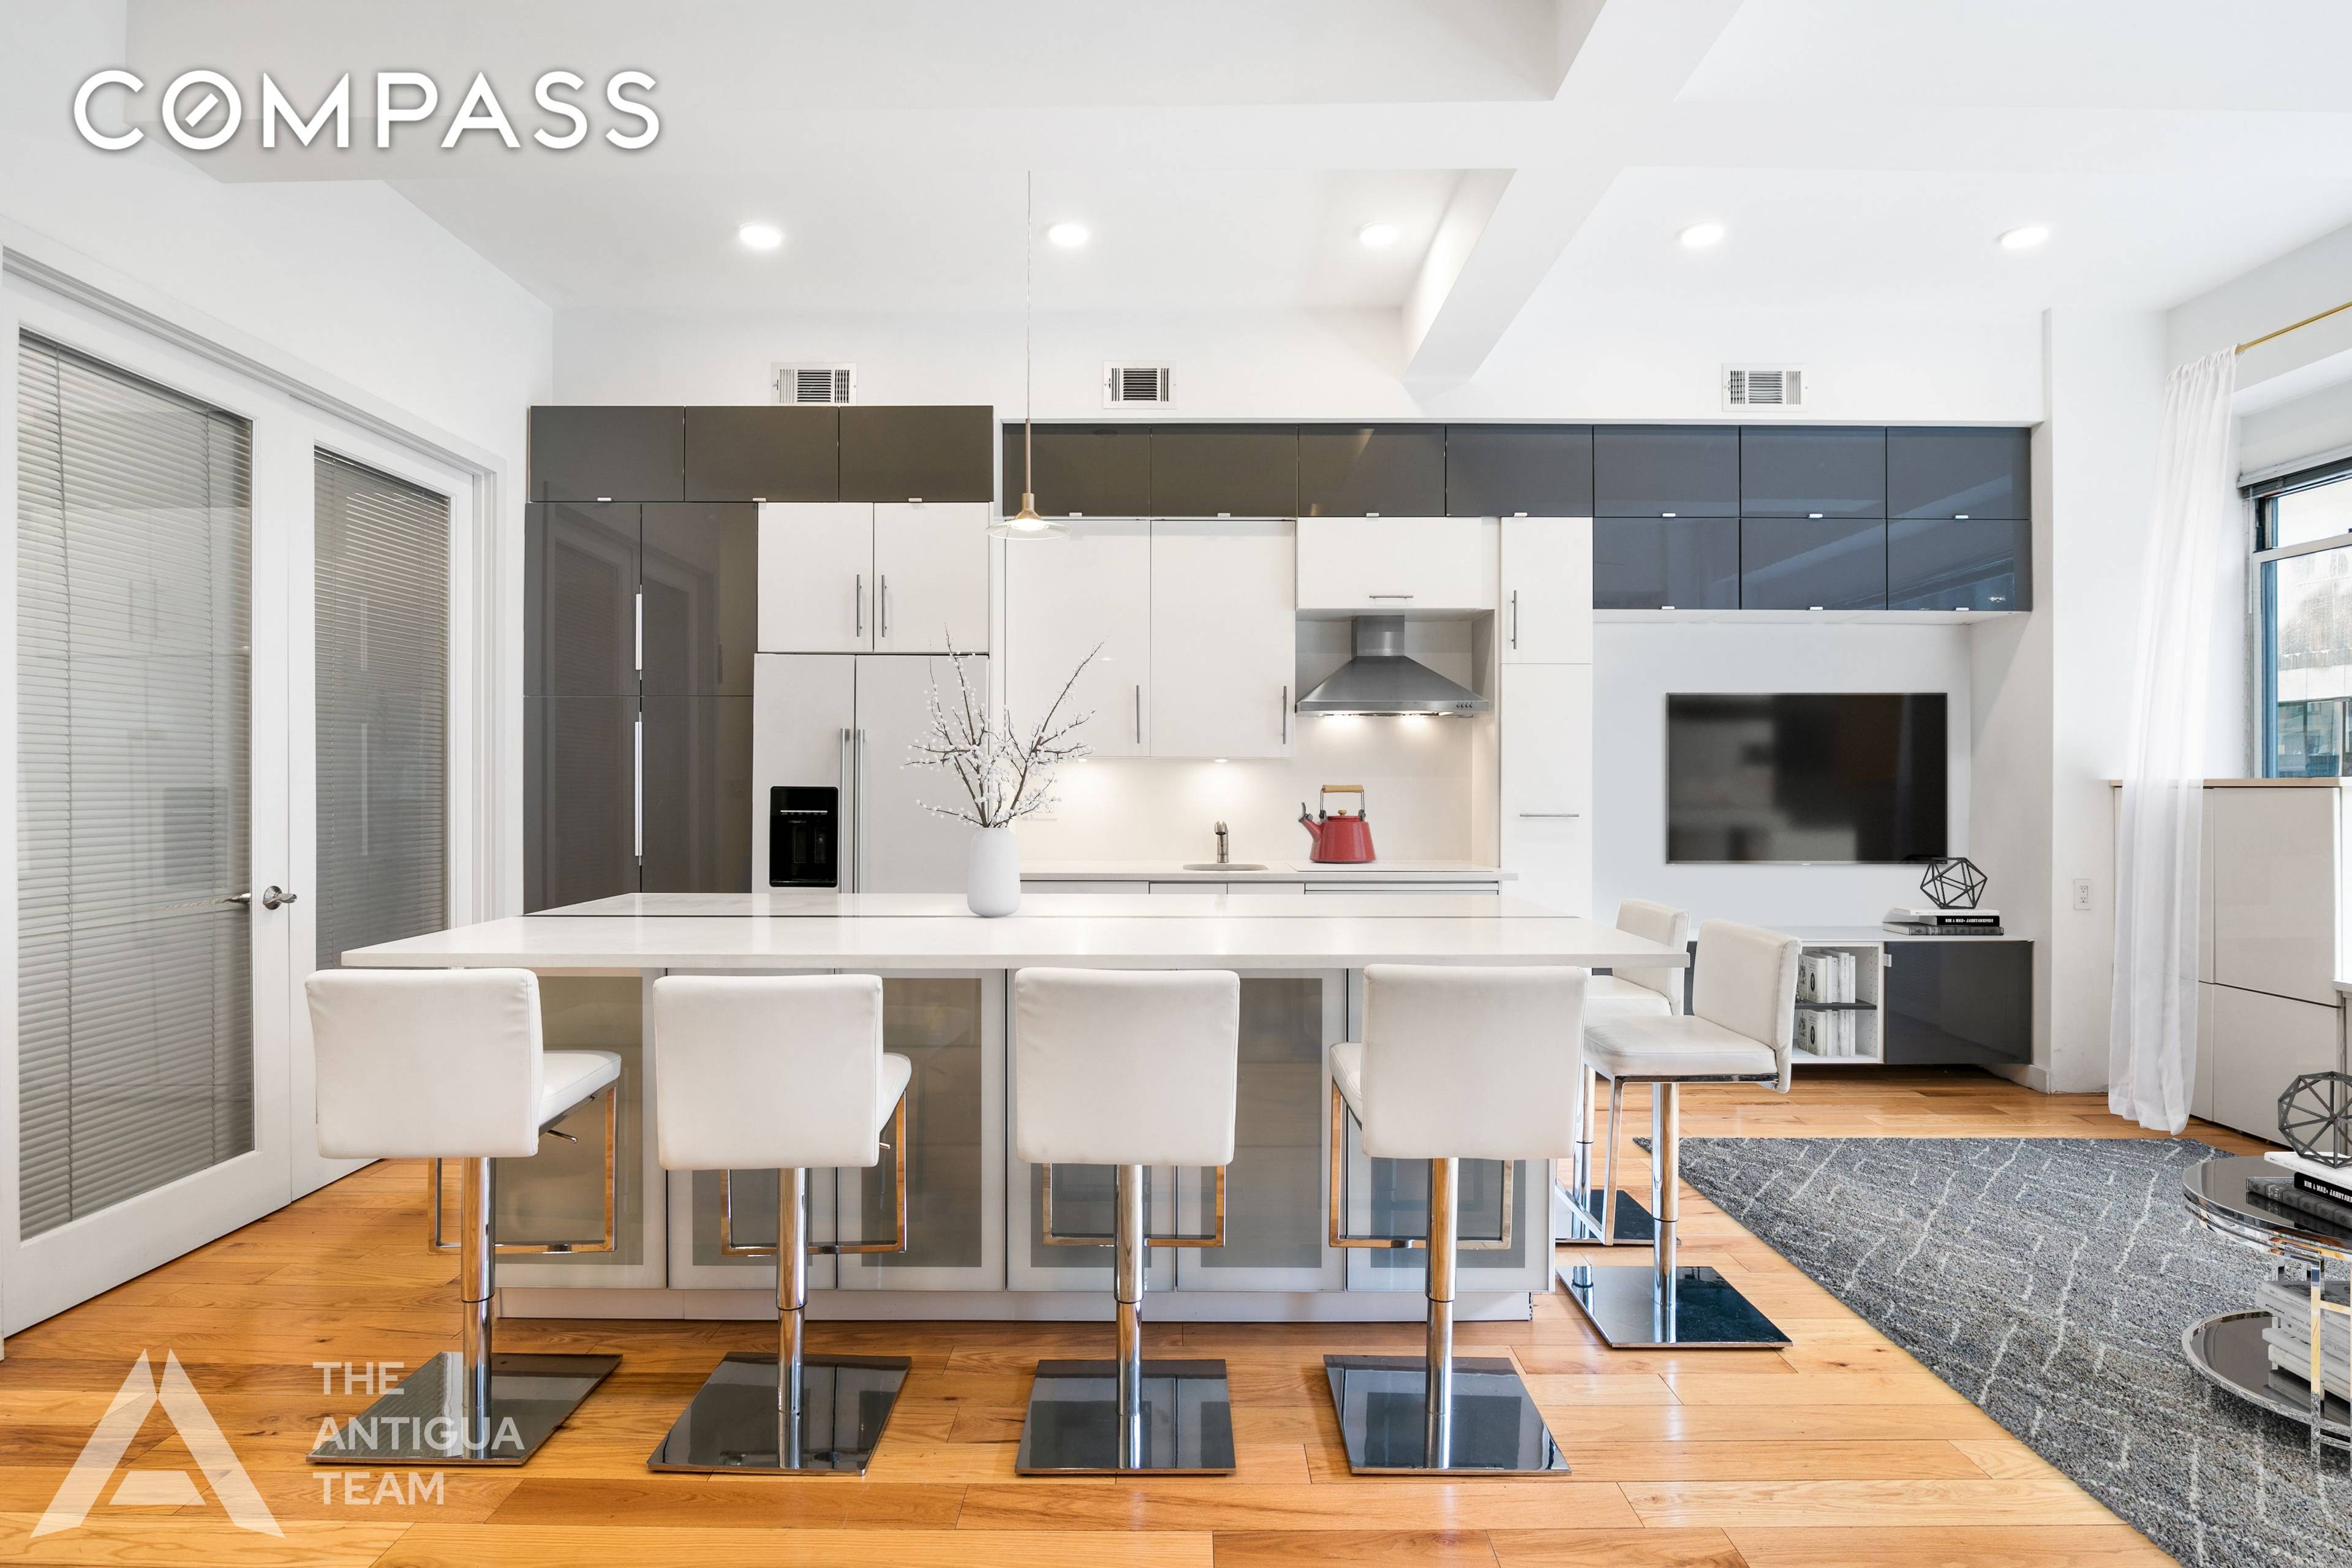 Classically renovated Loft in prime Chelsea at the crossroads of, Herald Square, Union Square and The Theater district.